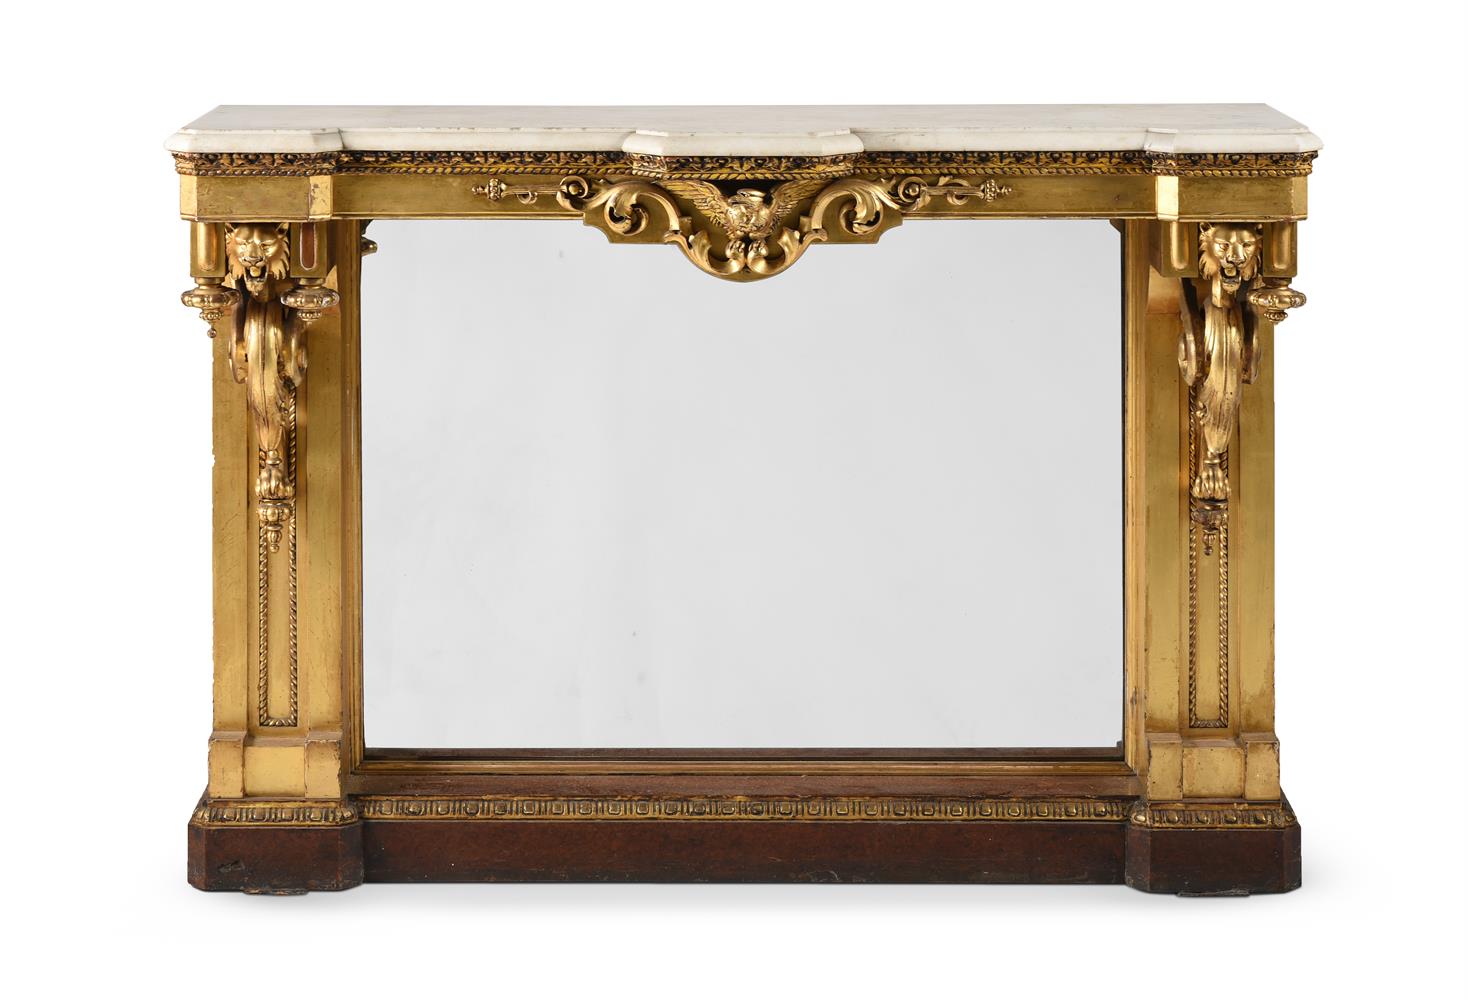 A VICTORIAN GILTWOOD AND AMBOYNA CONSOLE TABLELATE 19TH CENTURY